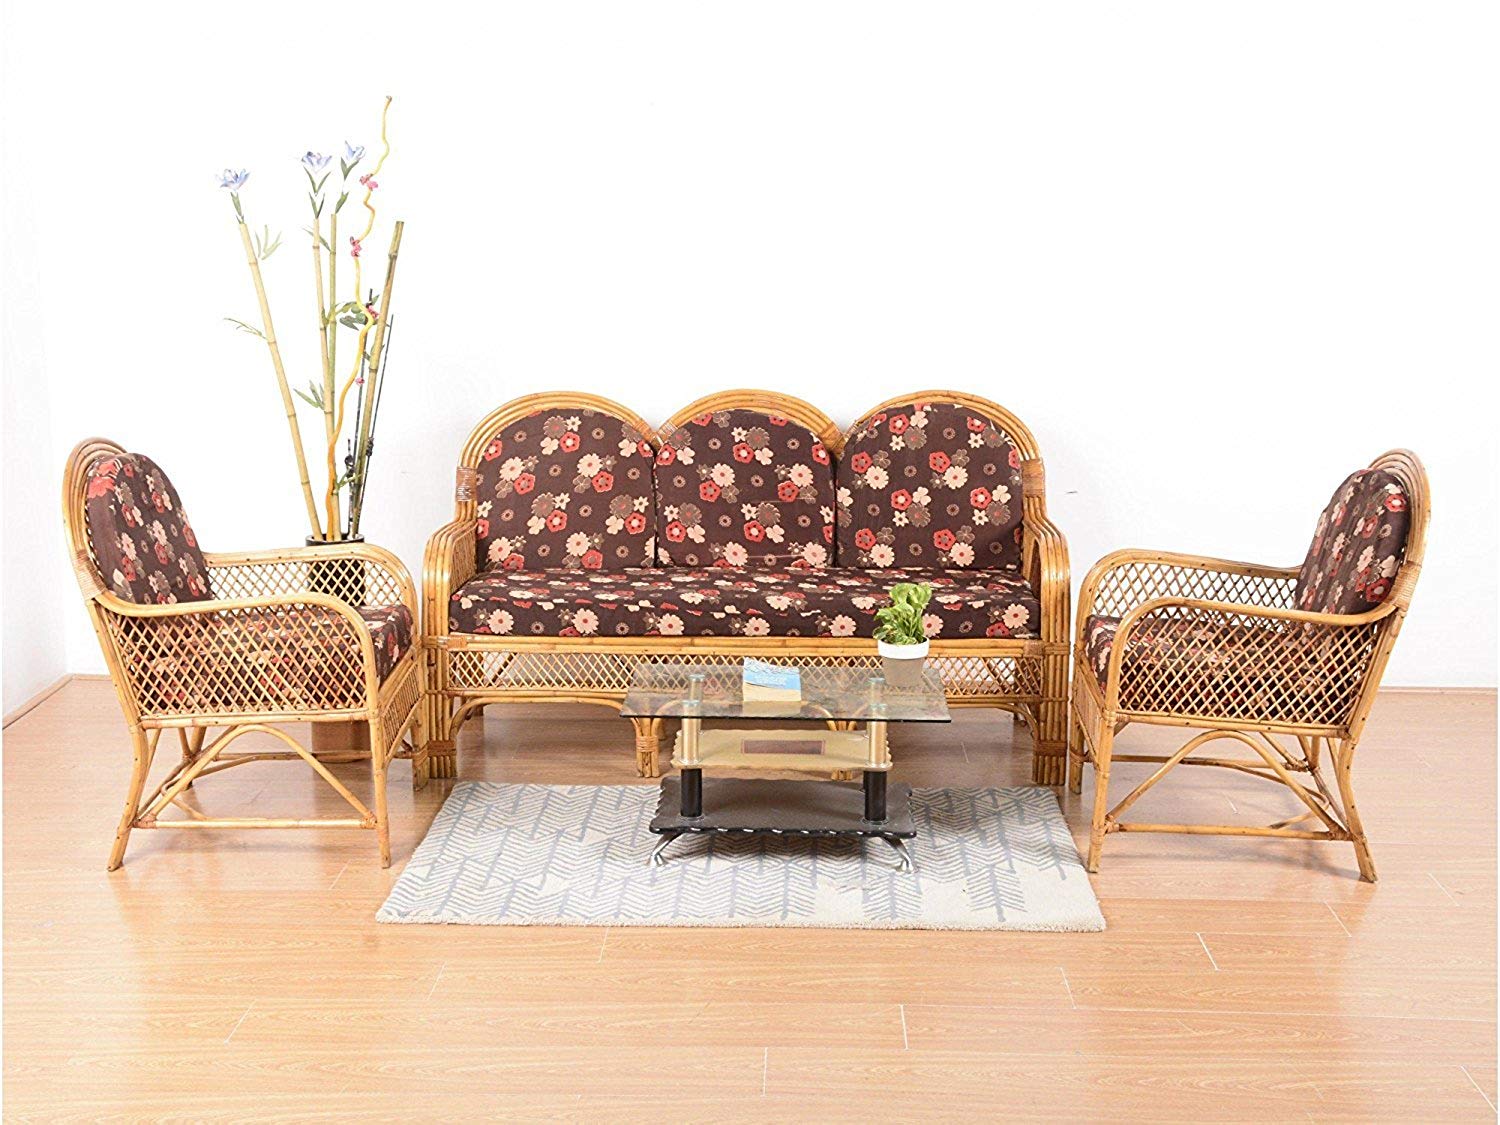 IRA Natural Rattan Cane 3 Seater Sofa Set and 2 Single Seater Chair wi